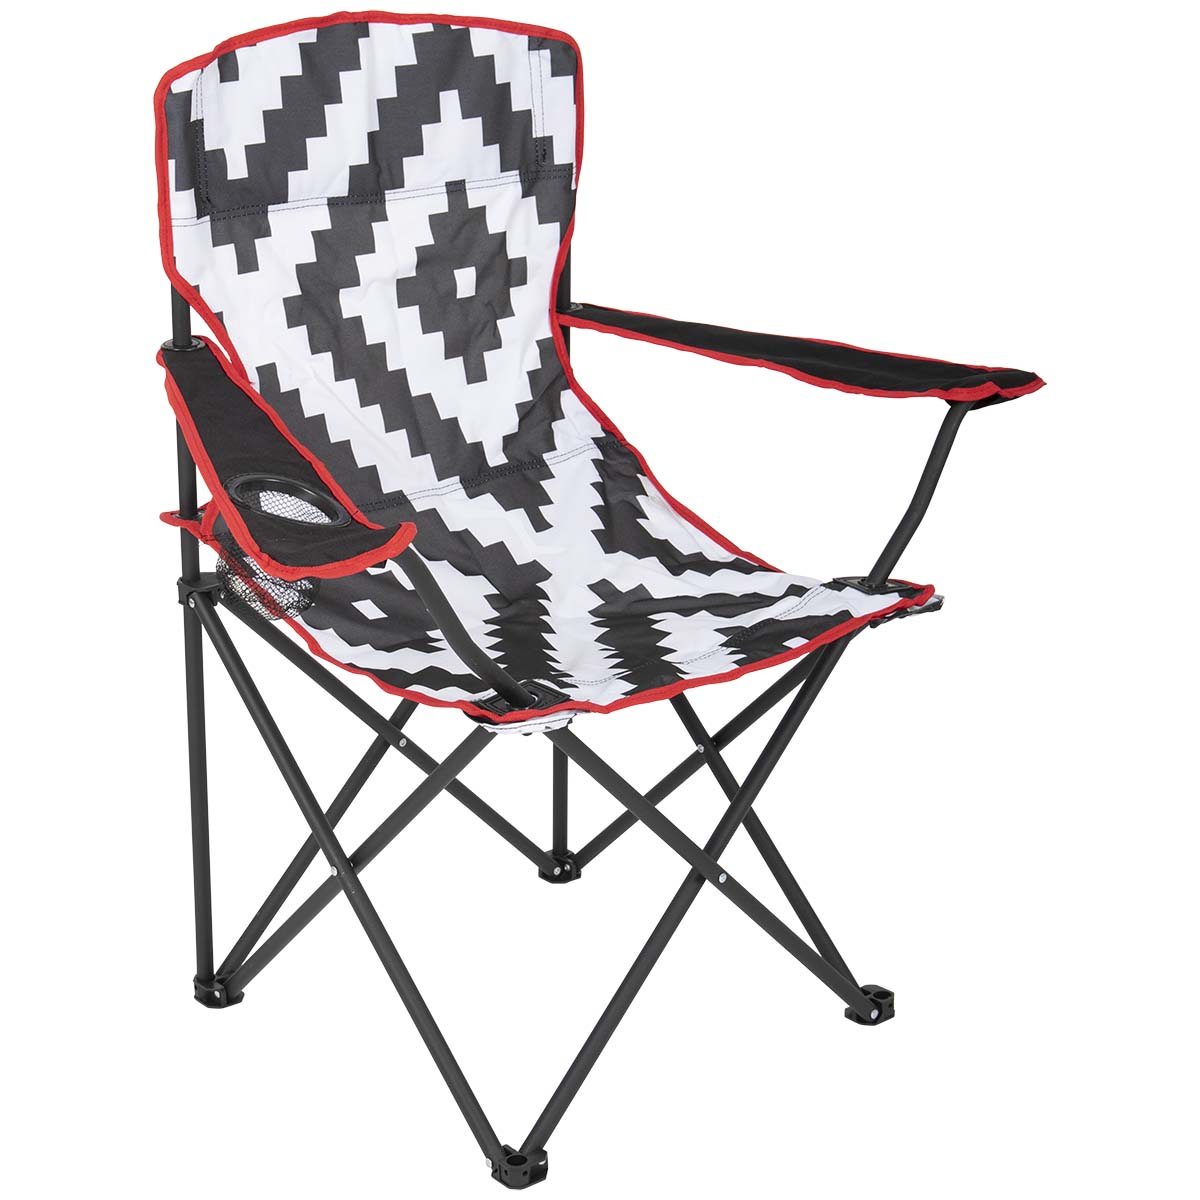 1267187 A trendy and modern lightweight folding chair. This folding chair has comfortable armrests with a special drinks holder. Very compact when folded and the included carrier bag makes for easy transport. The chair has a steel frame with a 600 denier nylon seat.